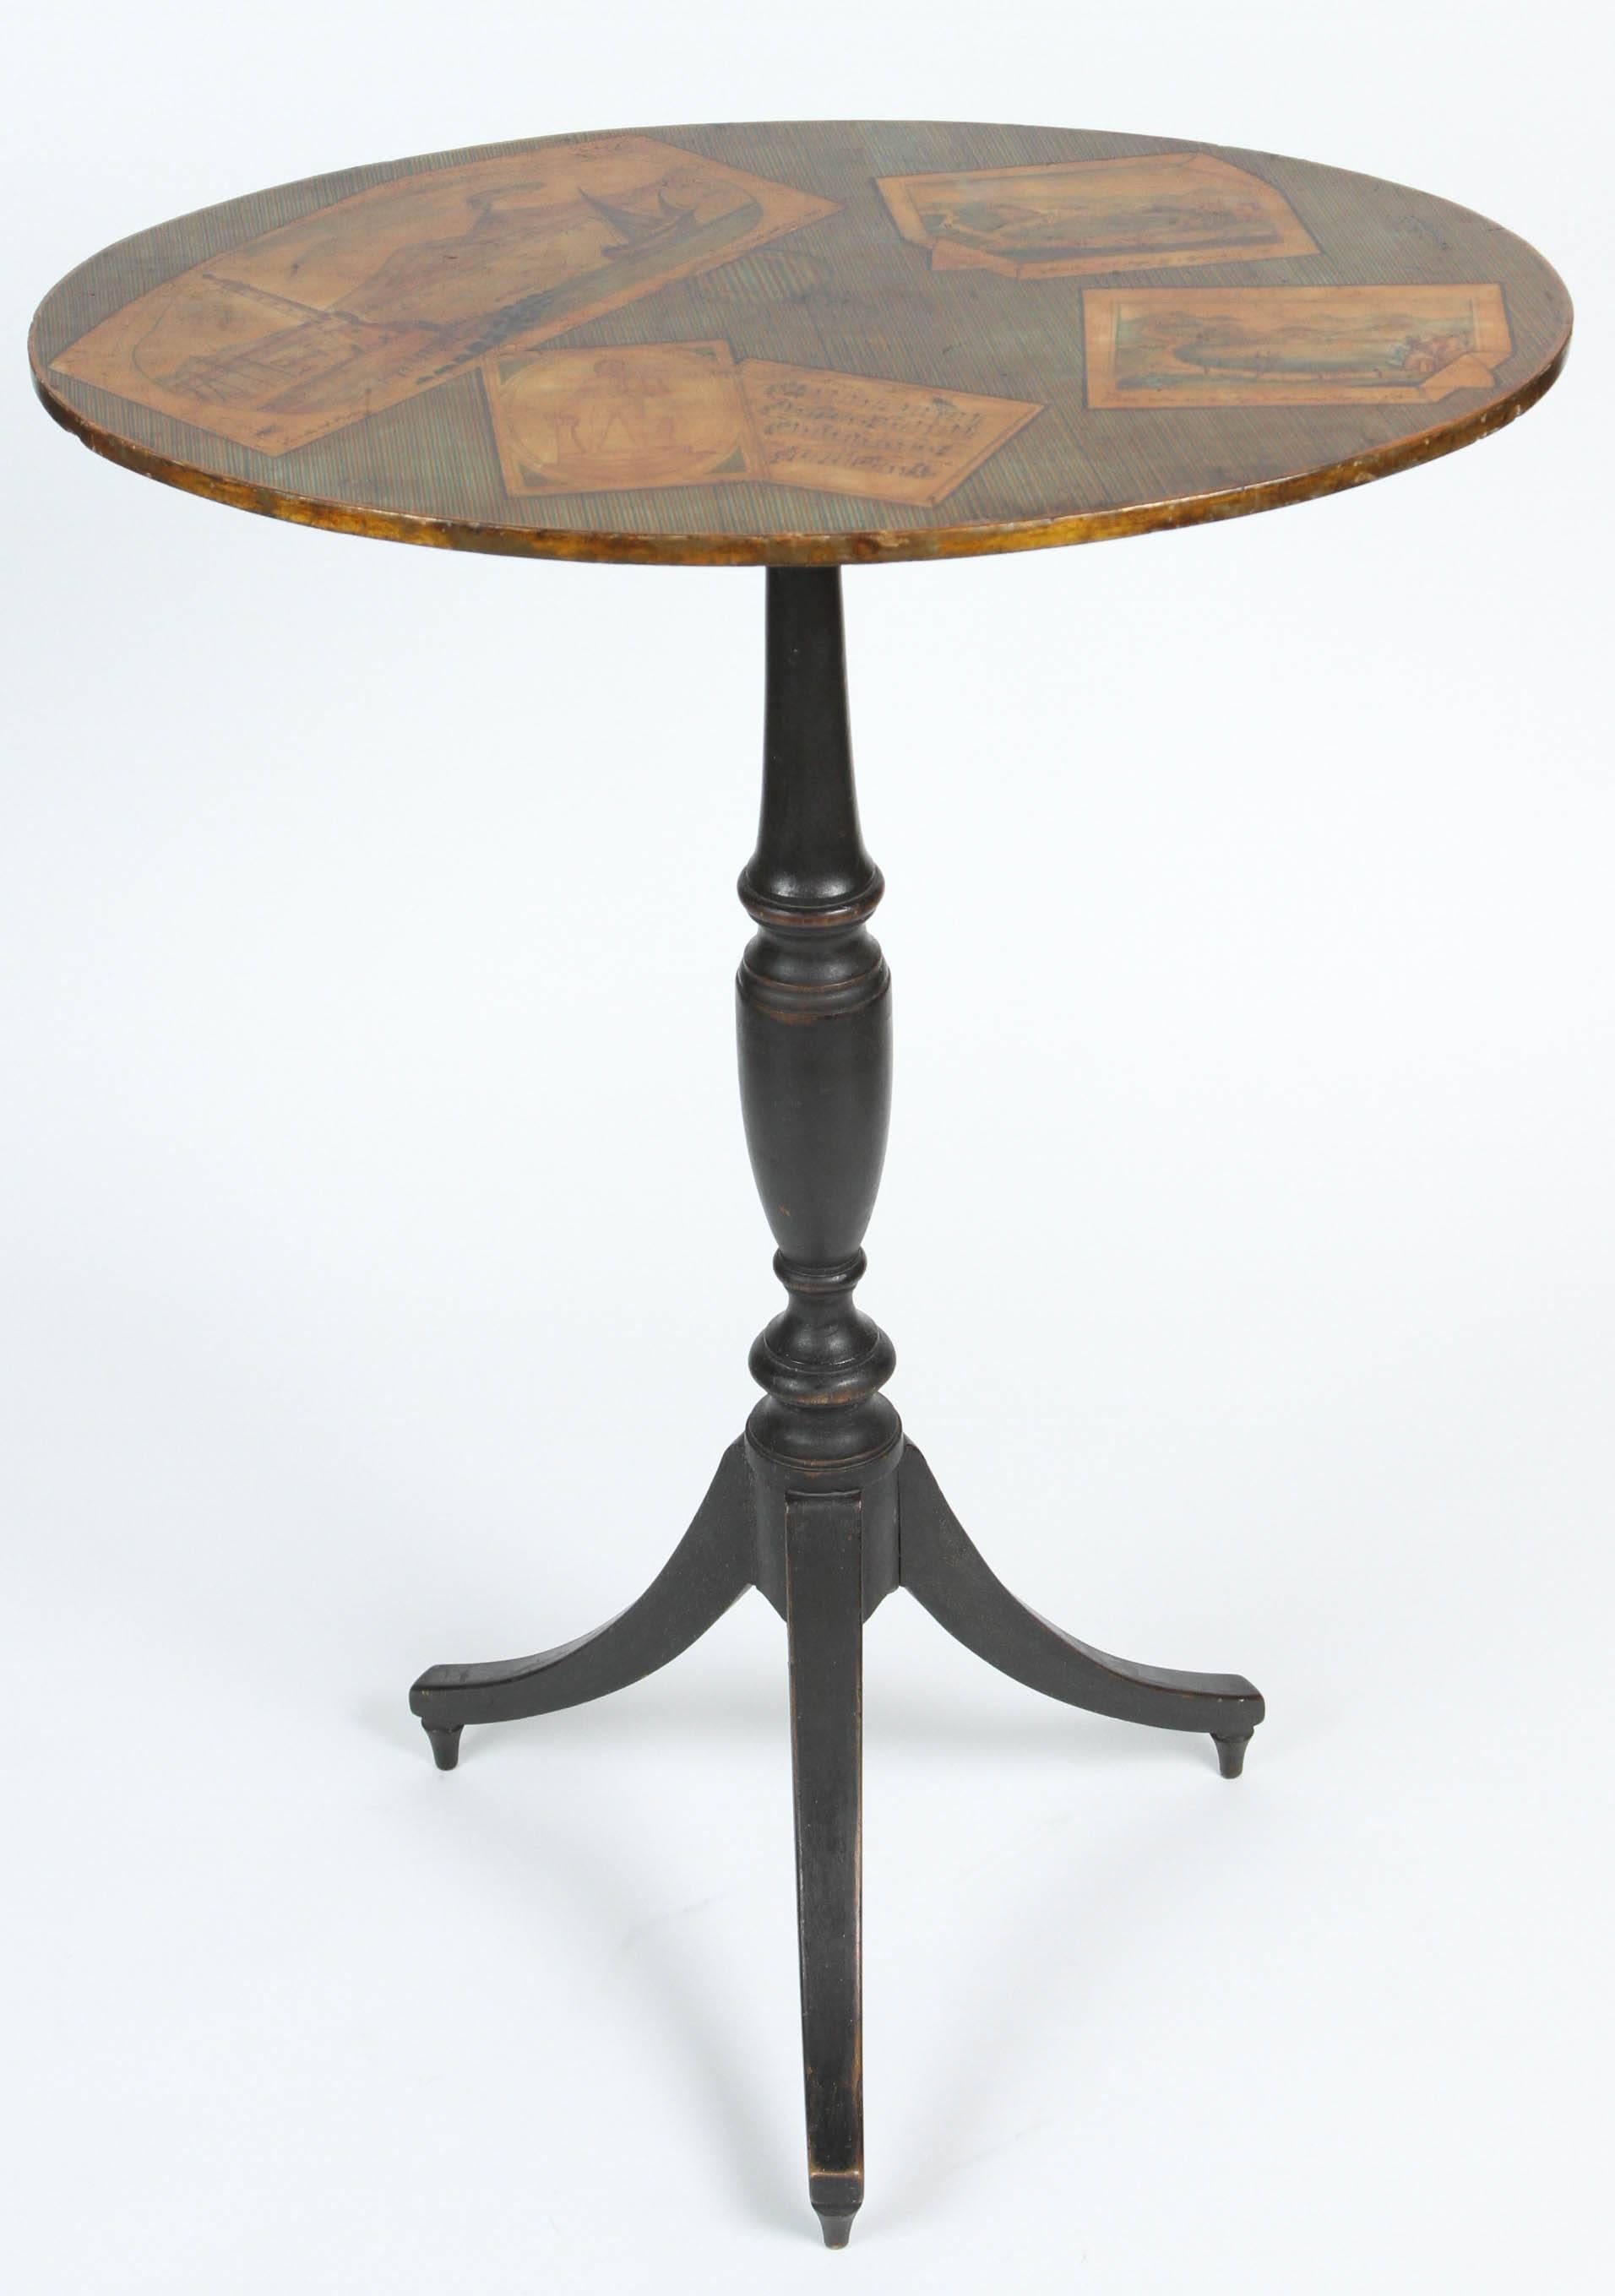 Regency 19th Century End Table with Trompe L'oeil Paintings of Grande Tour Scenes For Sale